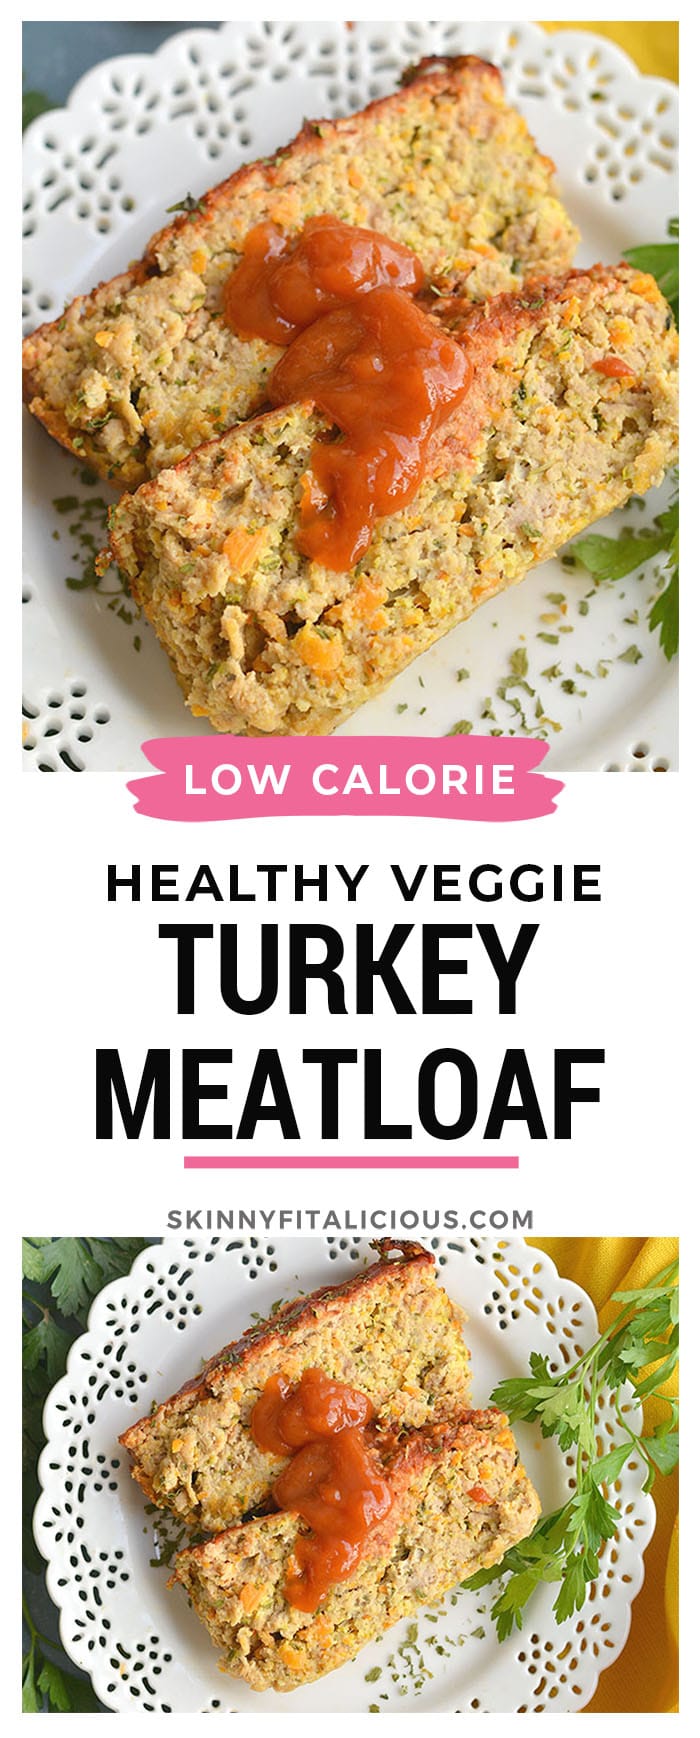 Savory Paleo Carrot Zucchini Meatloaf! A classic recipe gets a healthy makeover as a leaner, low carb, protein-packed meal